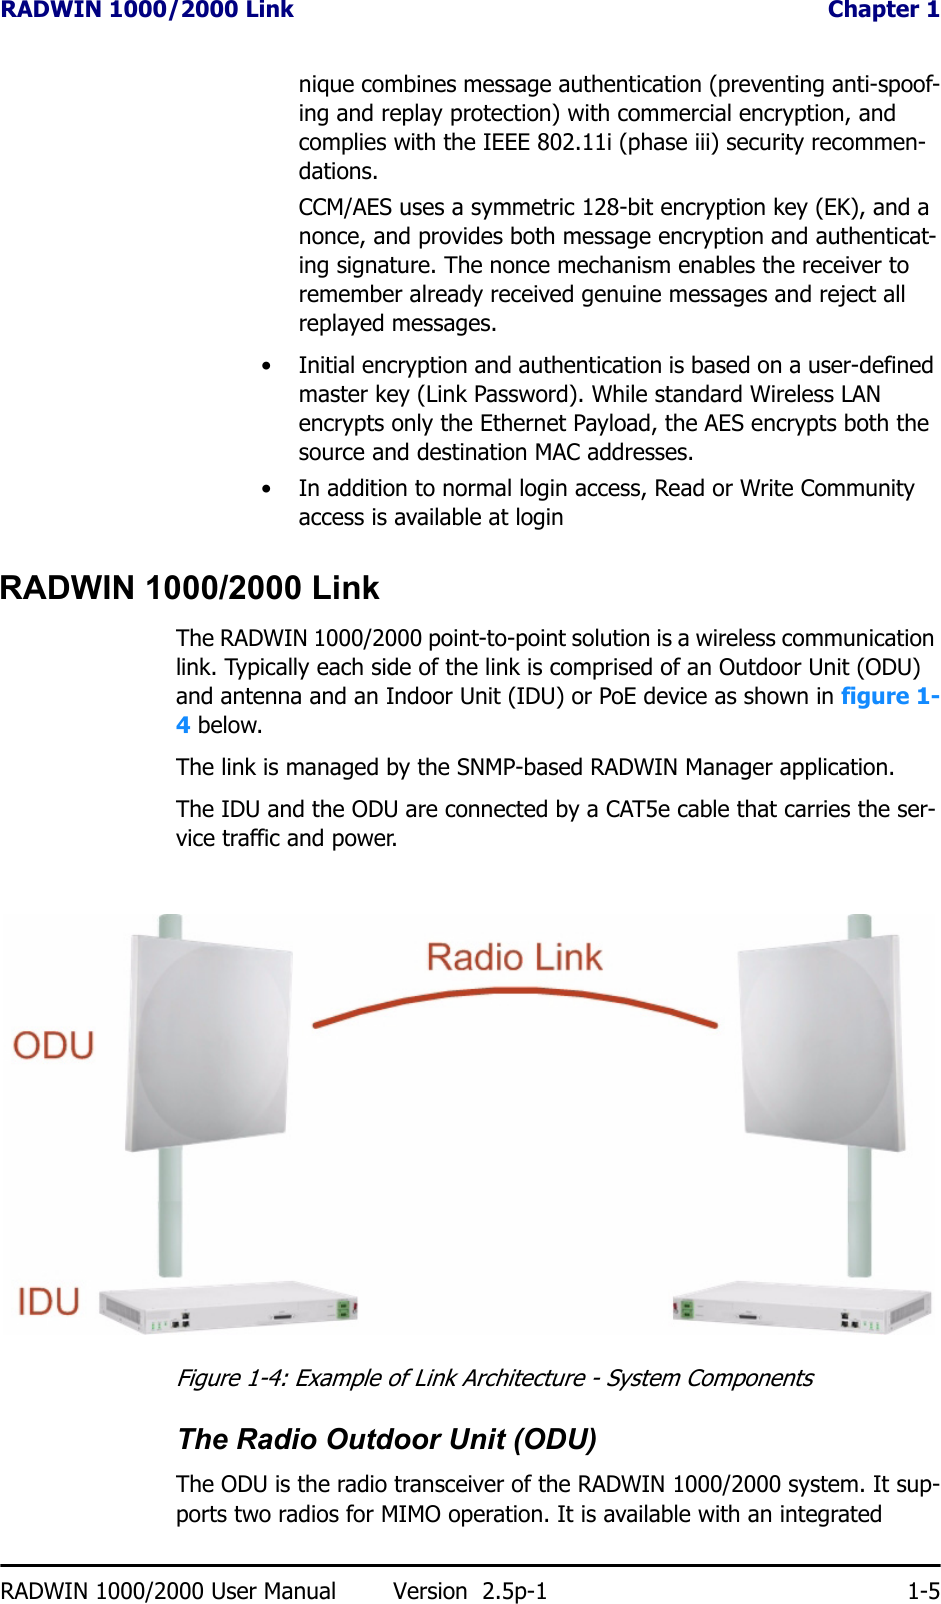 RADWIN 1000/2000 Link  Chapter 1RADWIN 1000/2000 User Manual Version  2.5p-1 1-5nique combines message authentication (preventing anti-spoof-ing and replay protection) with commercial encryption, and complies with the IEEE 802.11i (phase iii) security recommen-dations.CCM/AES uses a symmetric 128-bit encryption key (EK), and a nonce, and provides both message encryption and authenticat-ing signature. The nonce mechanism enables the receiver to remember already received genuine messages and reject all replayed messages.• Initial encryption and authentication is based on a user-defined master key (Link Password). While standard Wireless LAN encrypts only the Ethernet Payload, the AES encrypts both the source and destination MAC addresses.• In addition to normal login access, Read or Write Community access is available at loginRADWIN 1000/2000 LinkThe RADWIN 1000/2000 point-to-point solution is a wireless communication link. Typically each side of the link is comprised of an Outdoor Unit (ODU) and antenna and an Indoor Unit (IDU) or PoE device as shown in figure 1-4 below.The link is managed by the SNMP-based RADWIN Manager application.The IDU and the ODU are connected by a CAT5e cable that carries the ser-vice traffic and power. Figure 1-4: Example of Link Architecture - System ComponentsThe Radio Outdoor Unit (ODU)The ODU is the radio transceiver of the RADWIN 1000/2000 system. It sup-ports two radios for MIMO operation. It is available with an integrated 